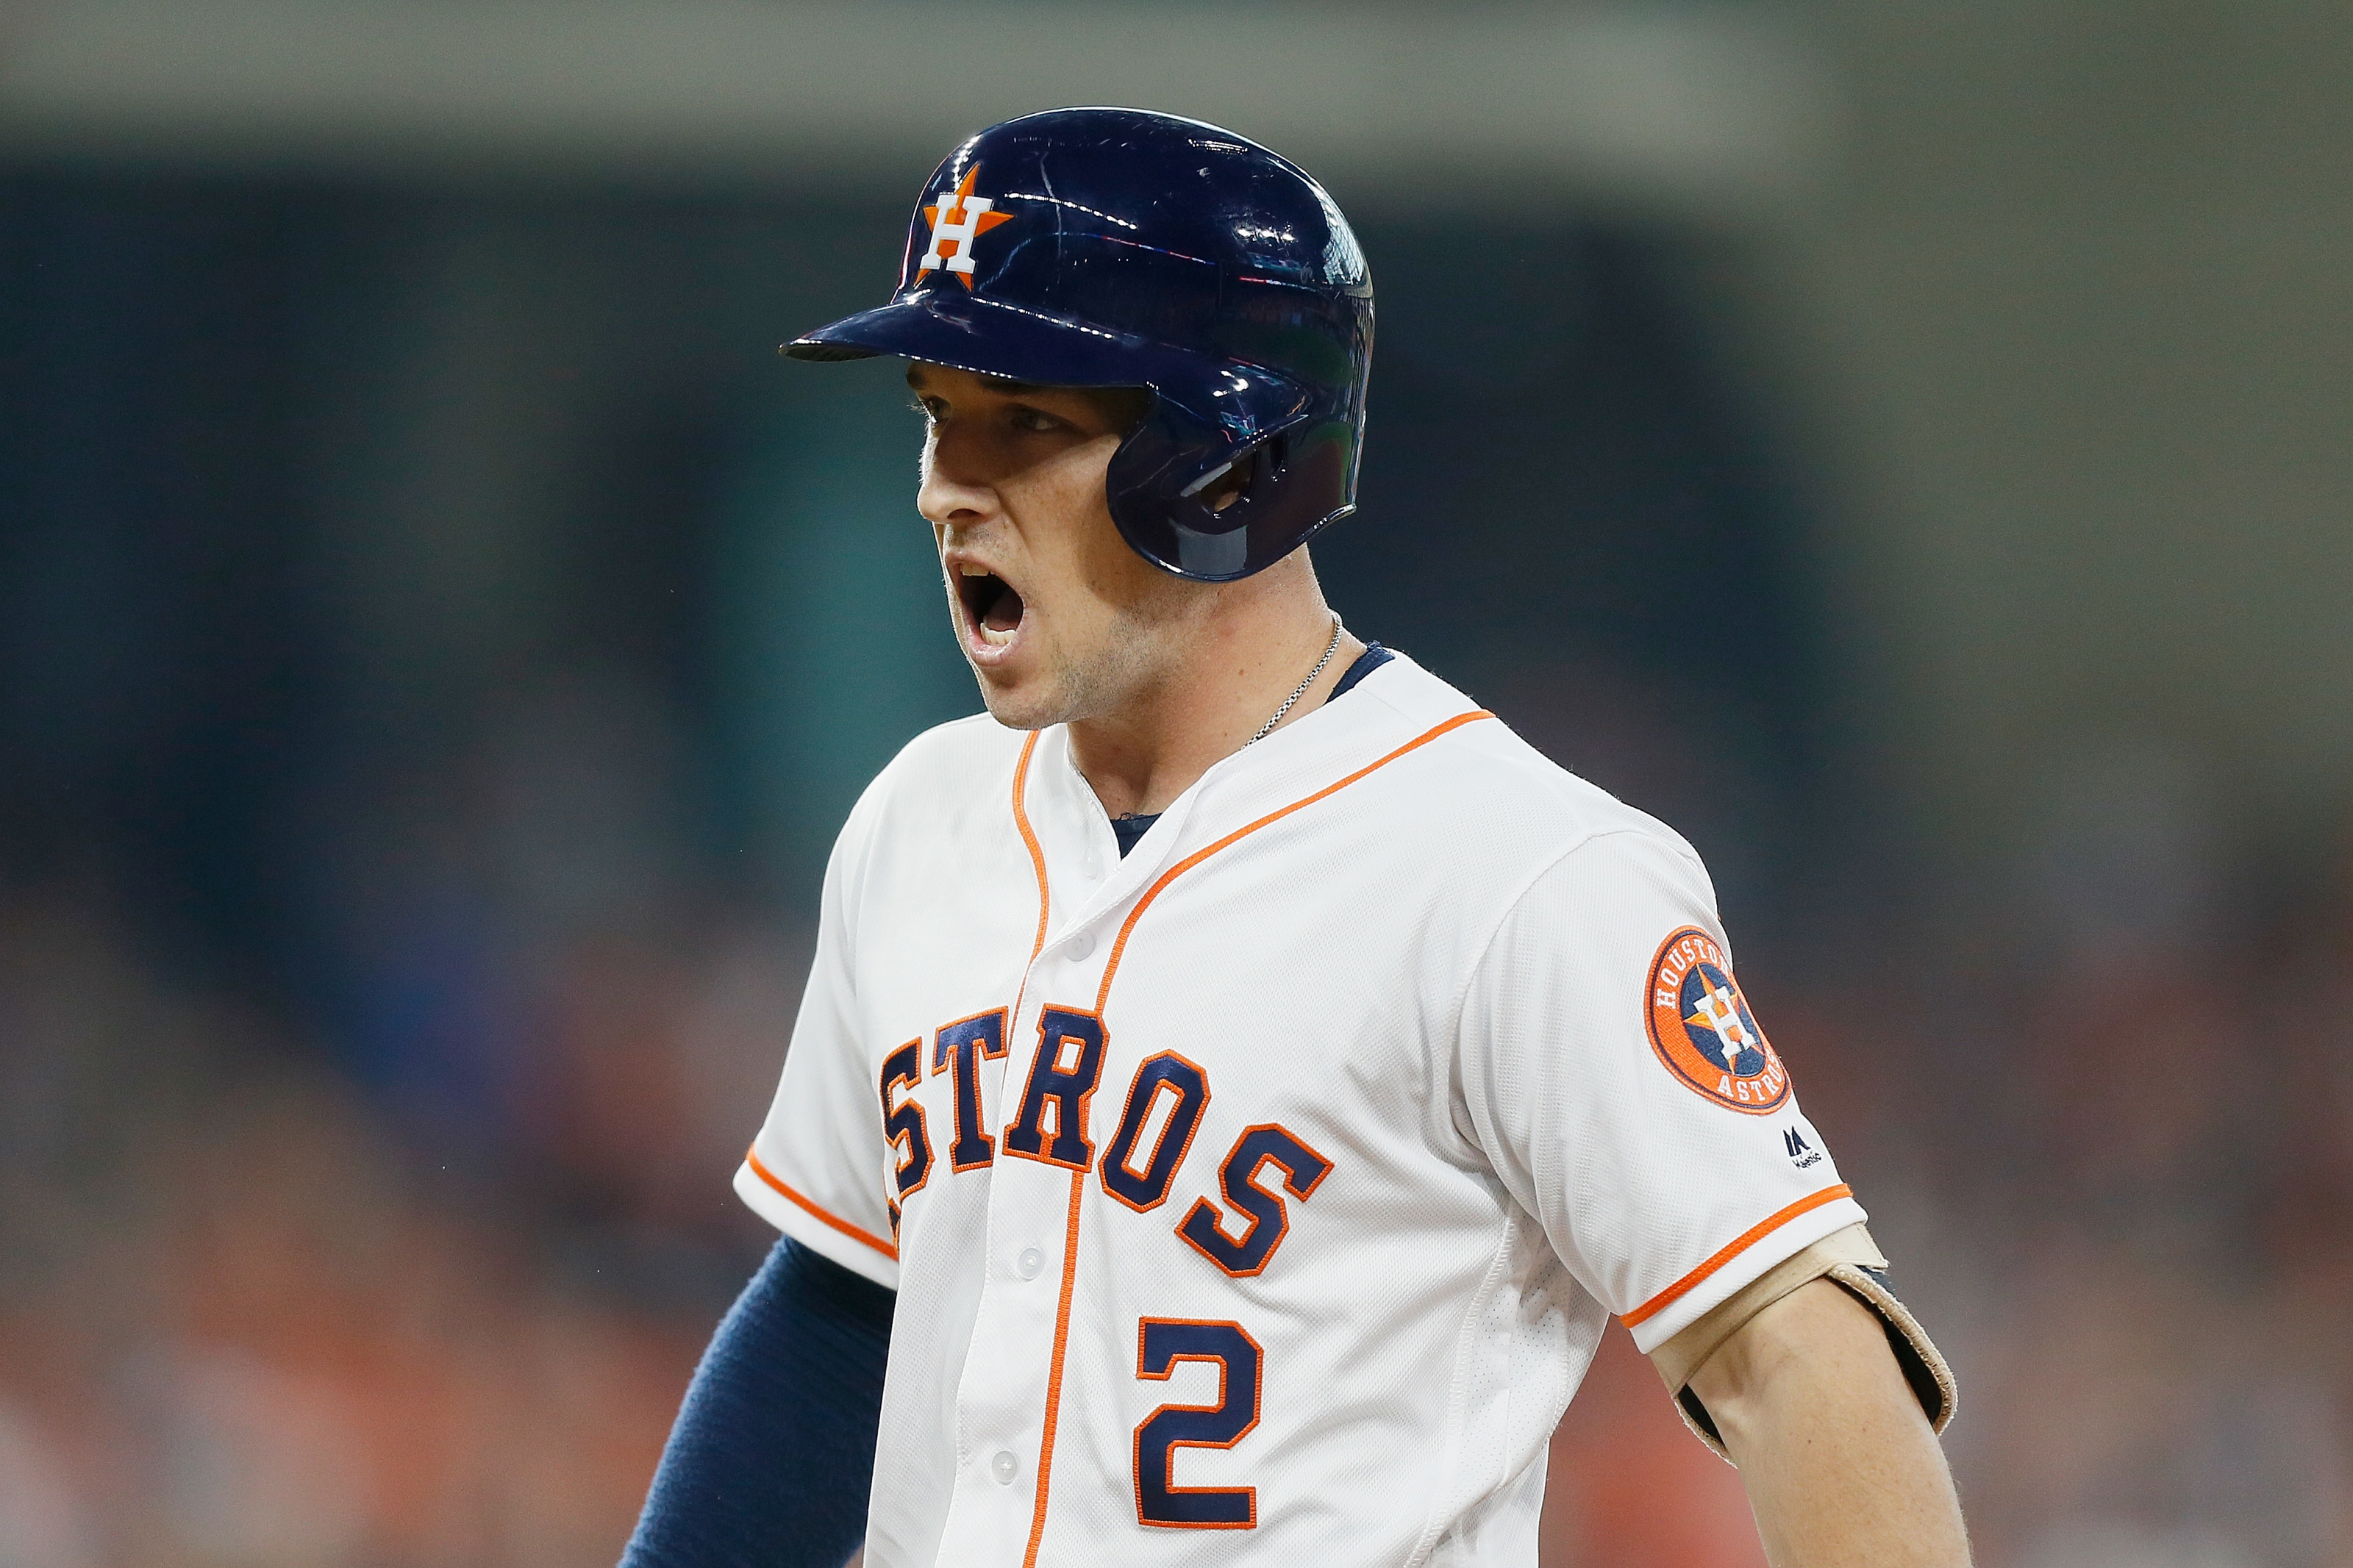 Former LSU star Alex Bregman showed the Tigers a lot of love this week